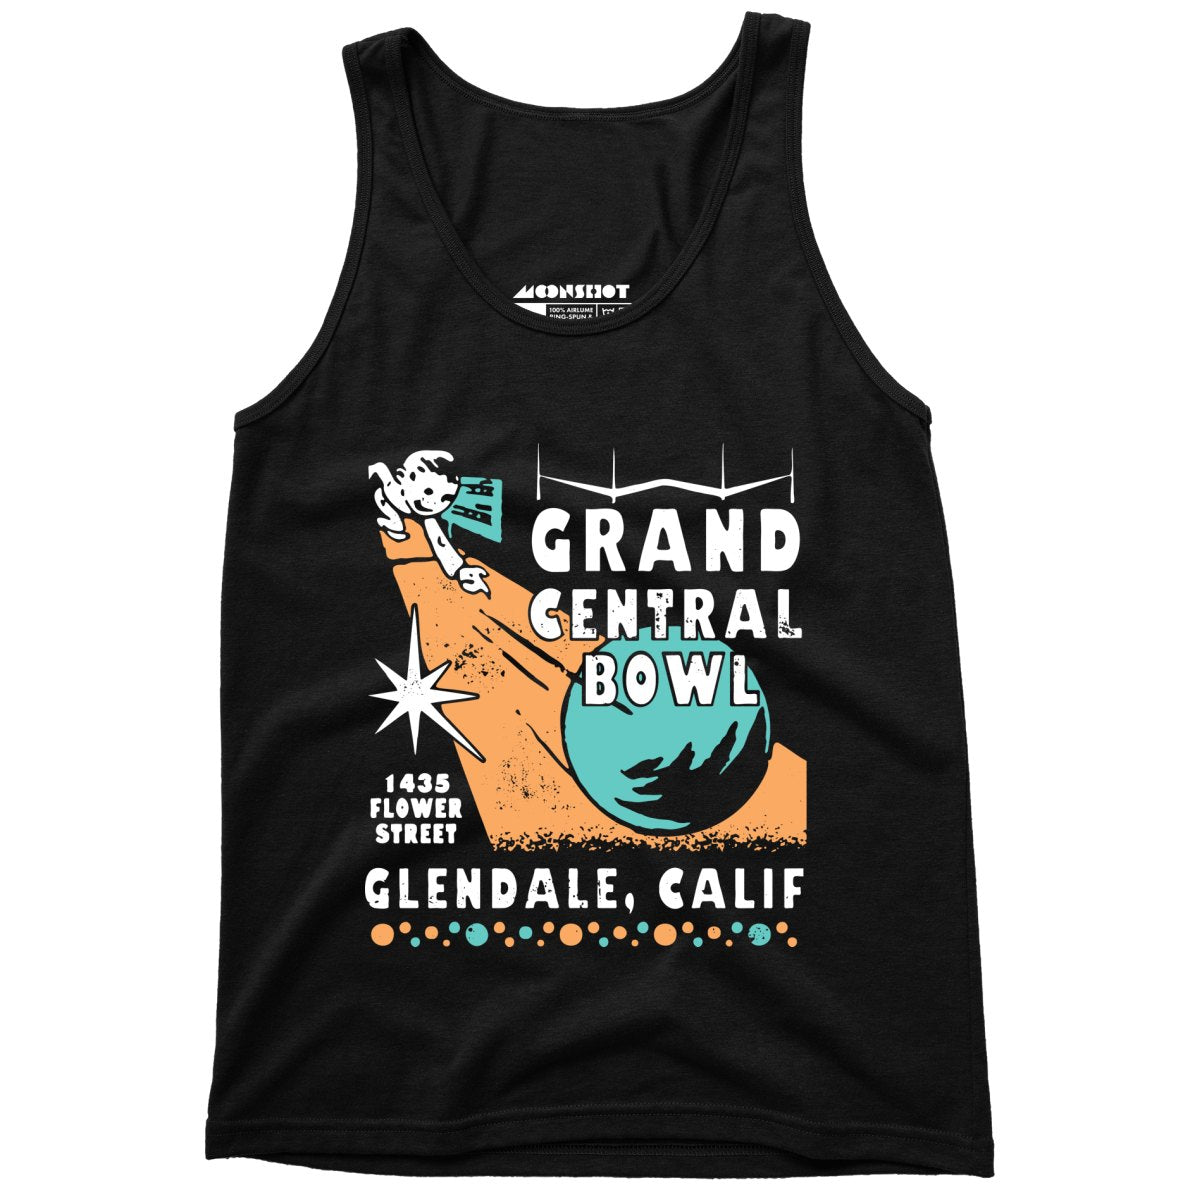 Grand Central Bowl - Glendale, CA - Vintage Bowling Alley - Unisex Tank Top